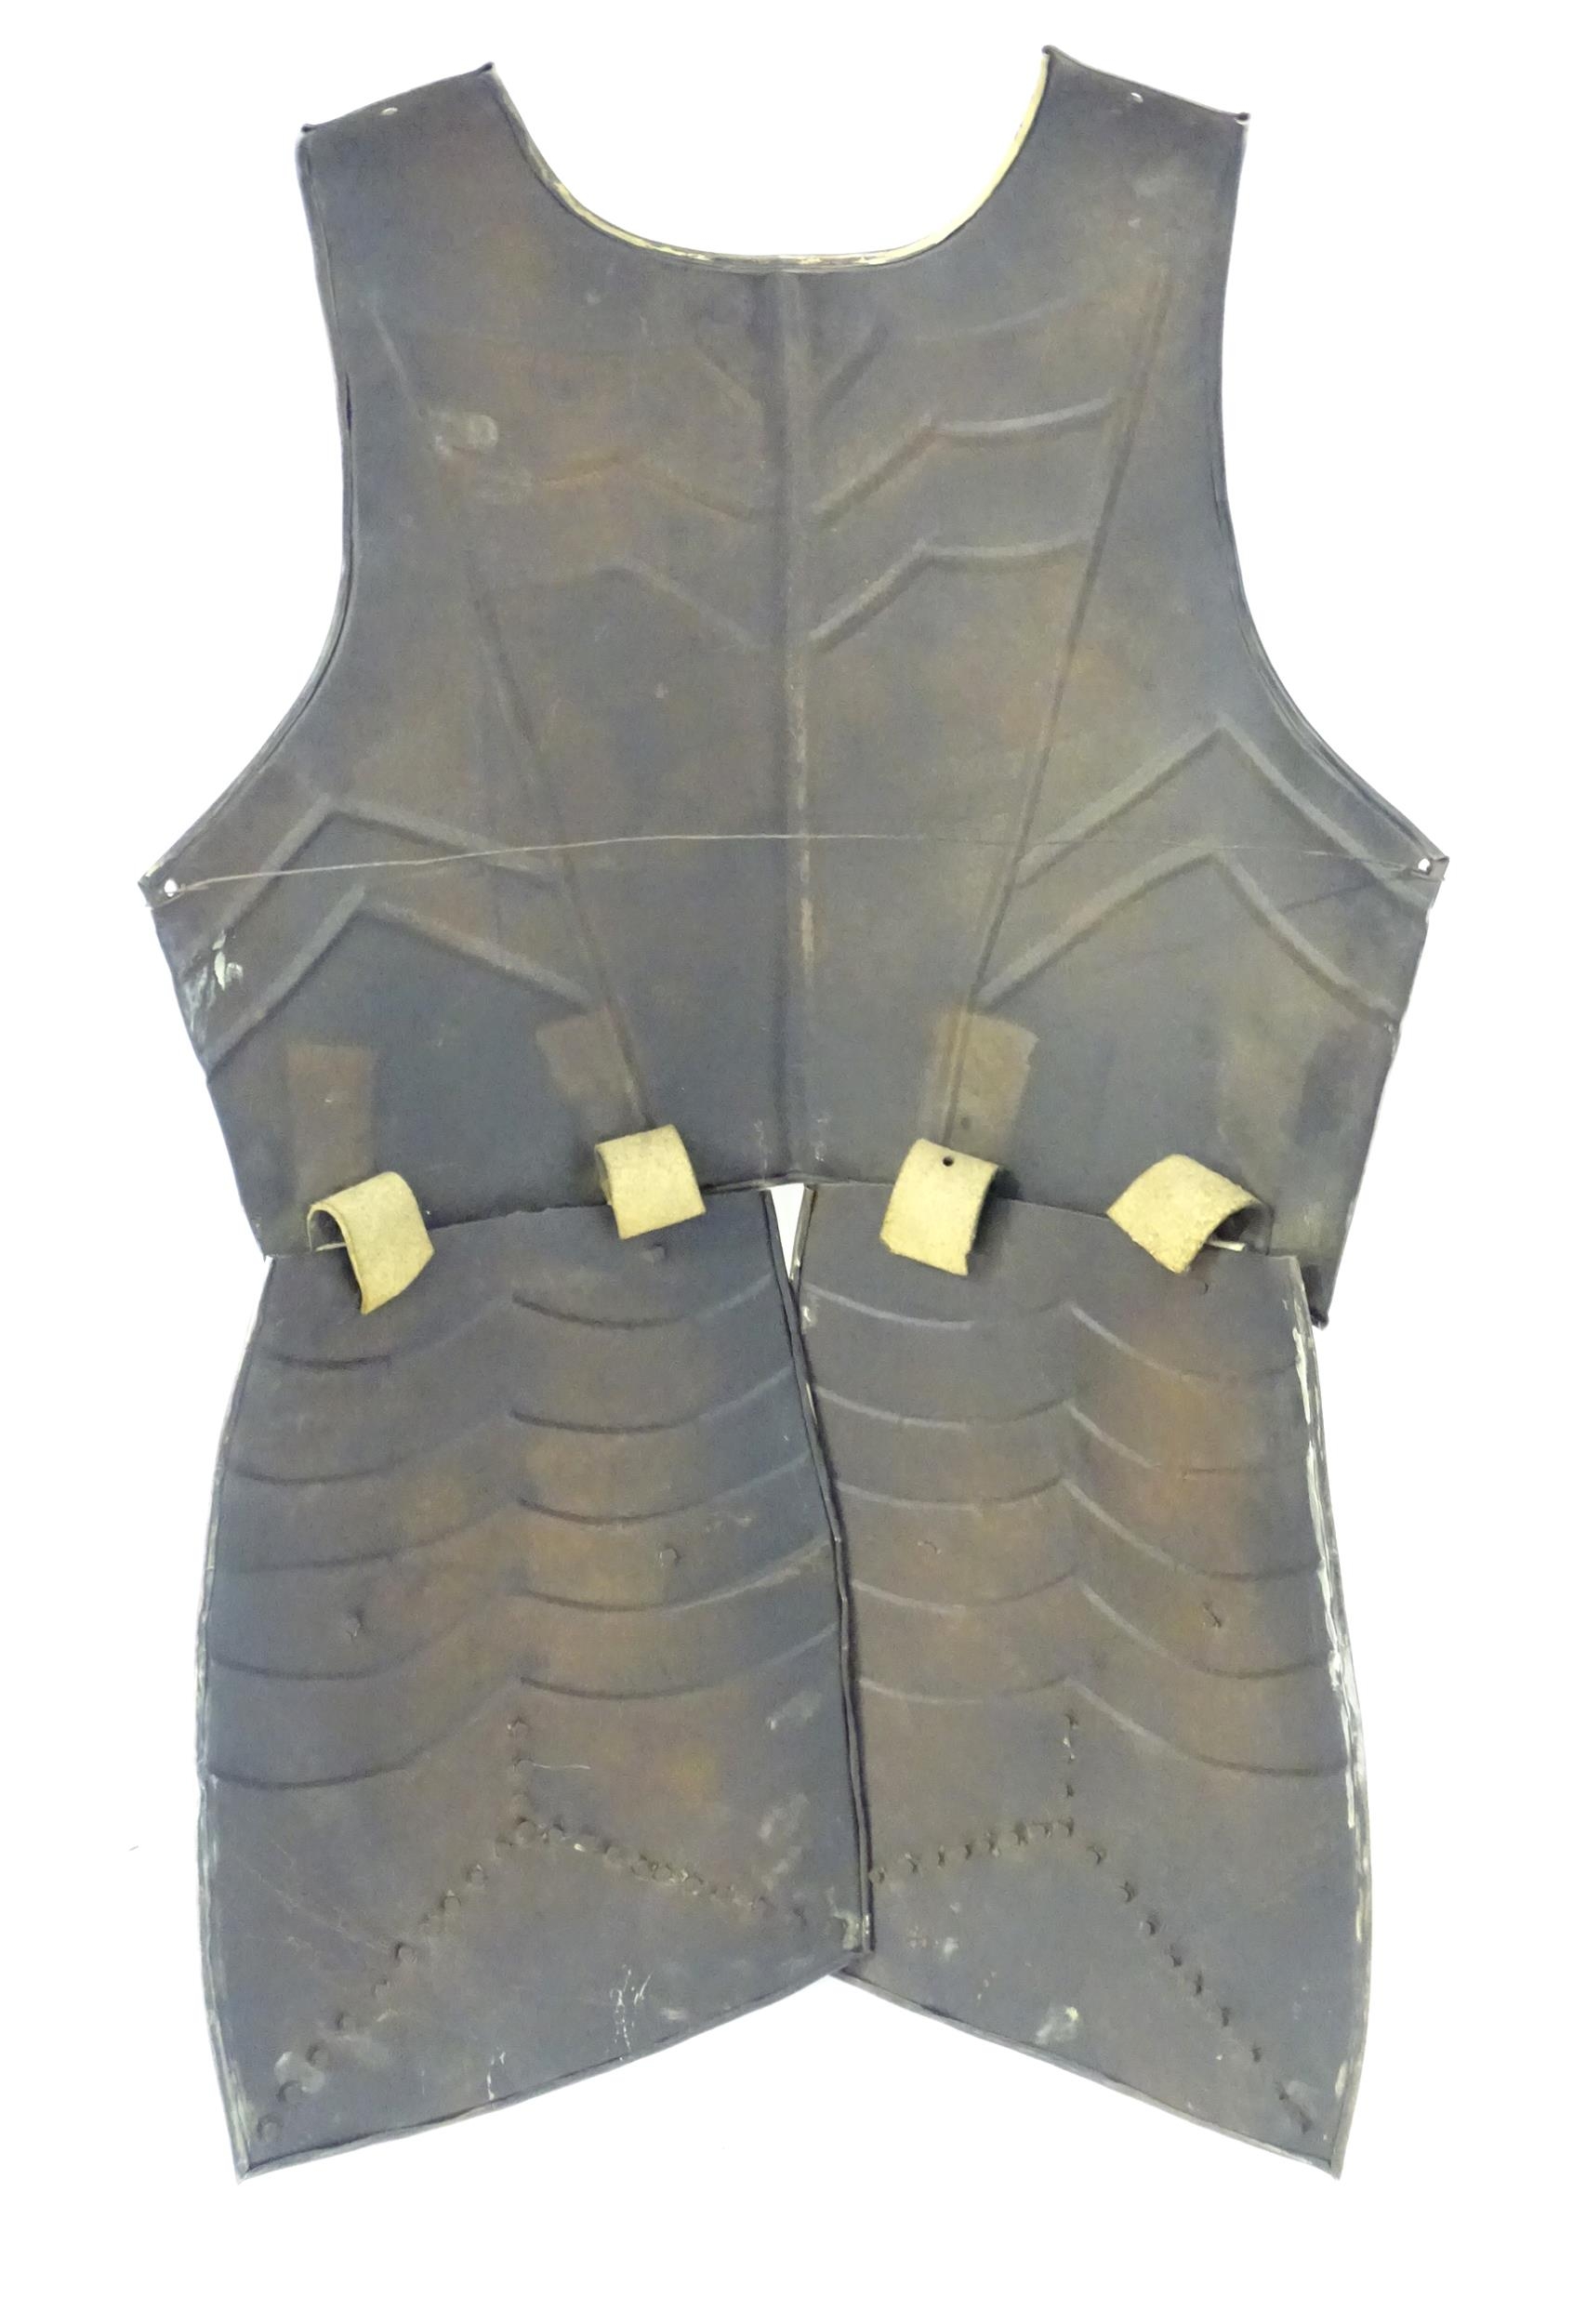 Militaria: 20thC medieval style display armour, comprising breastplate and tasset, constructed - Image 7 of 8